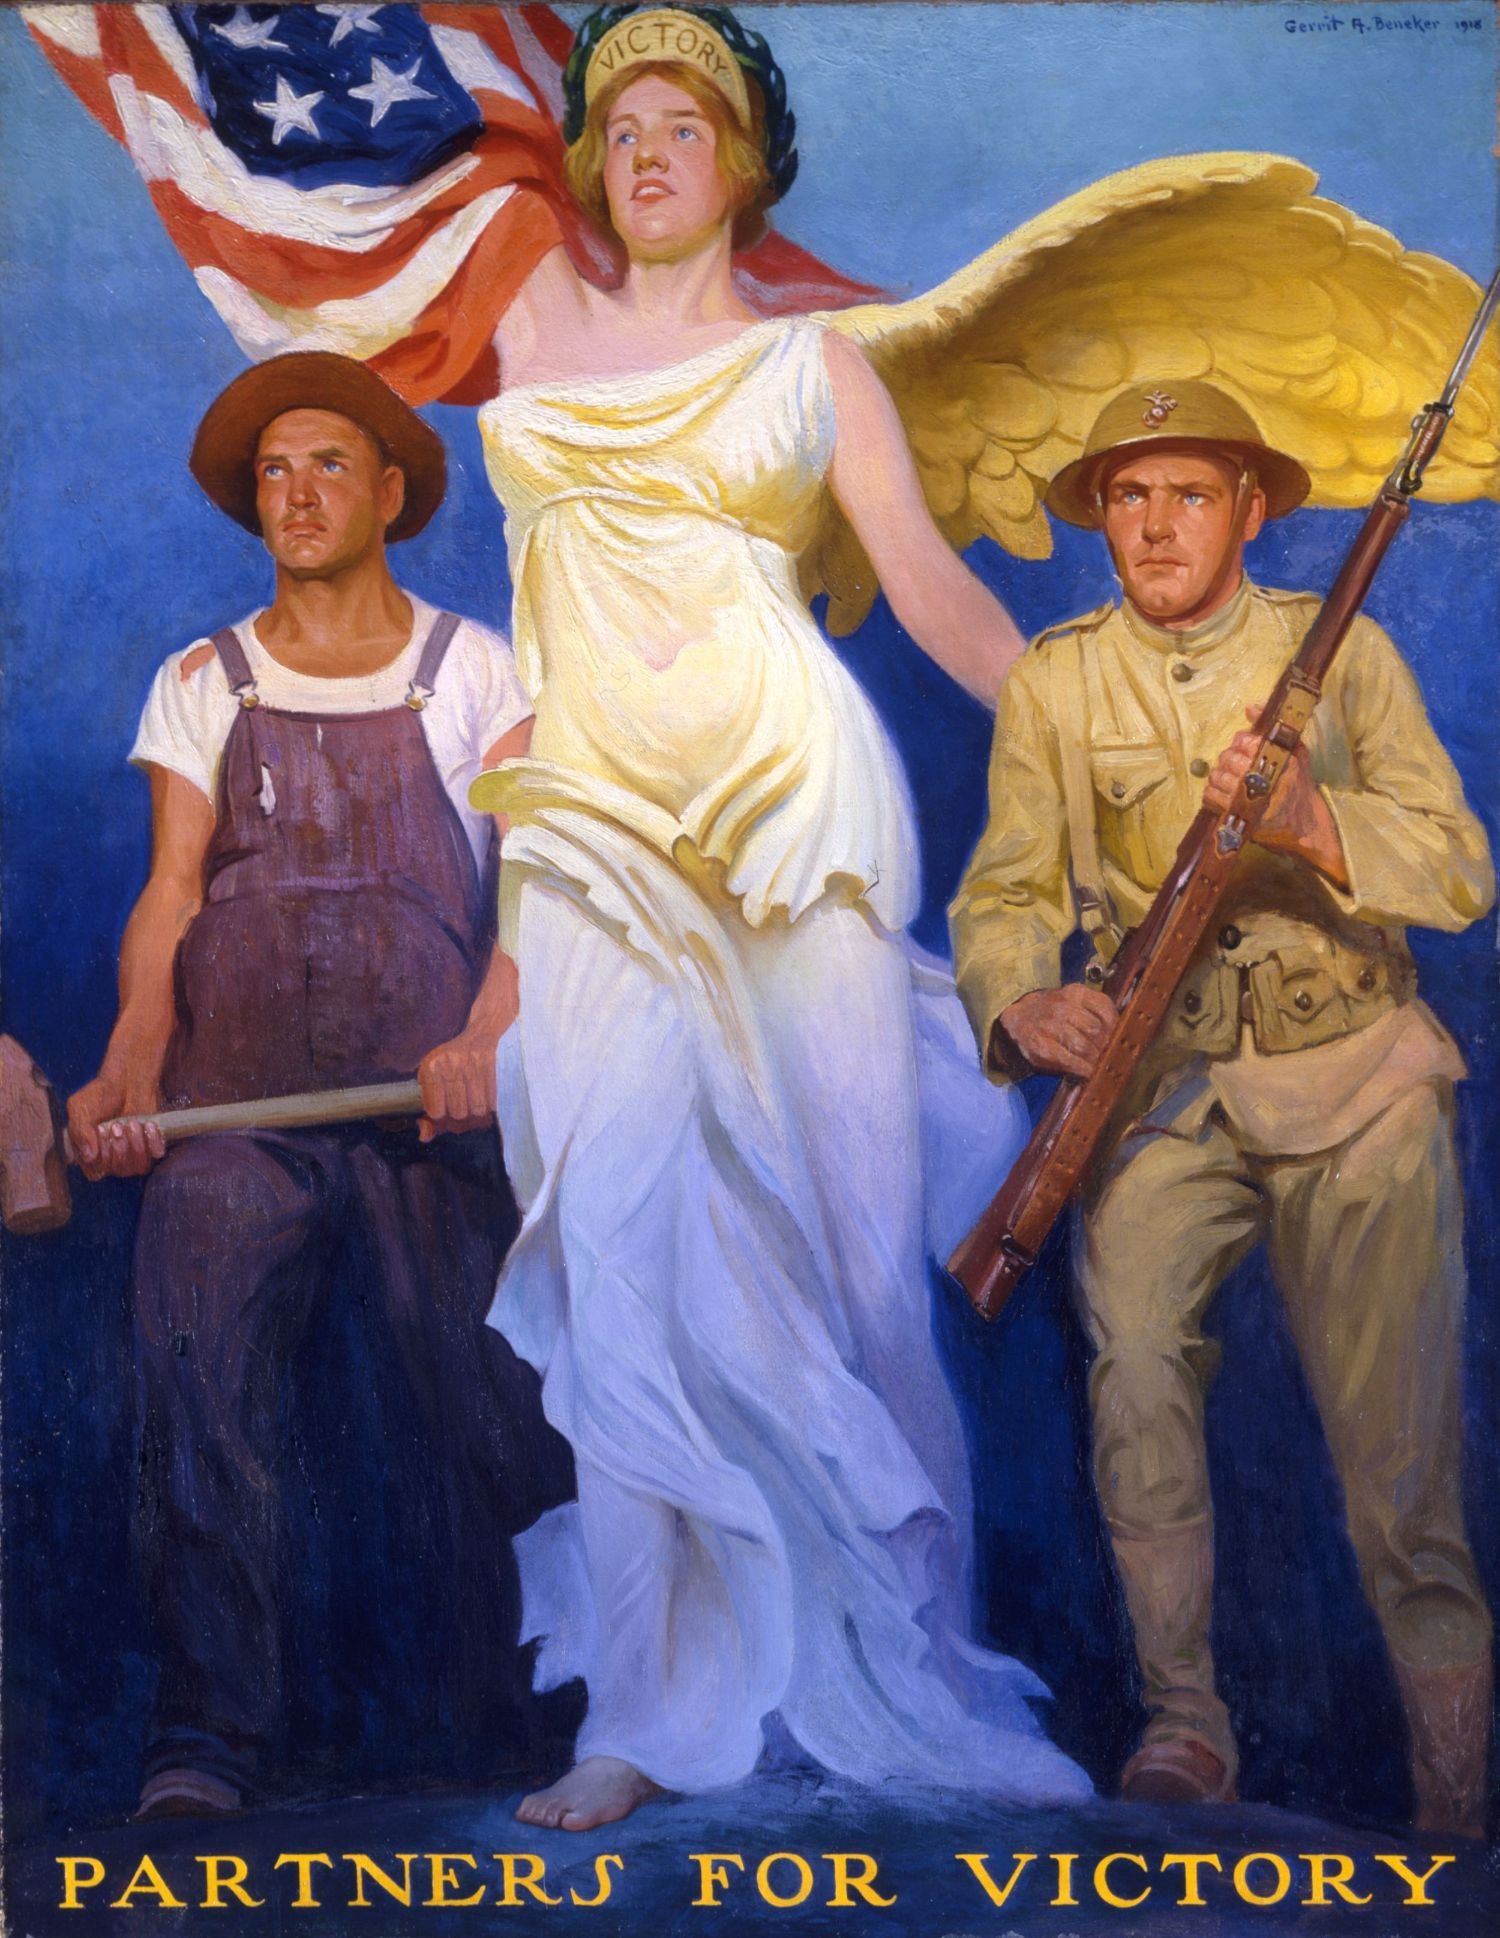   Gerrit A. Beneker (1882-1934)   Partners for Victory  1918, oil on canvas 50” x 40”, signed upper right 